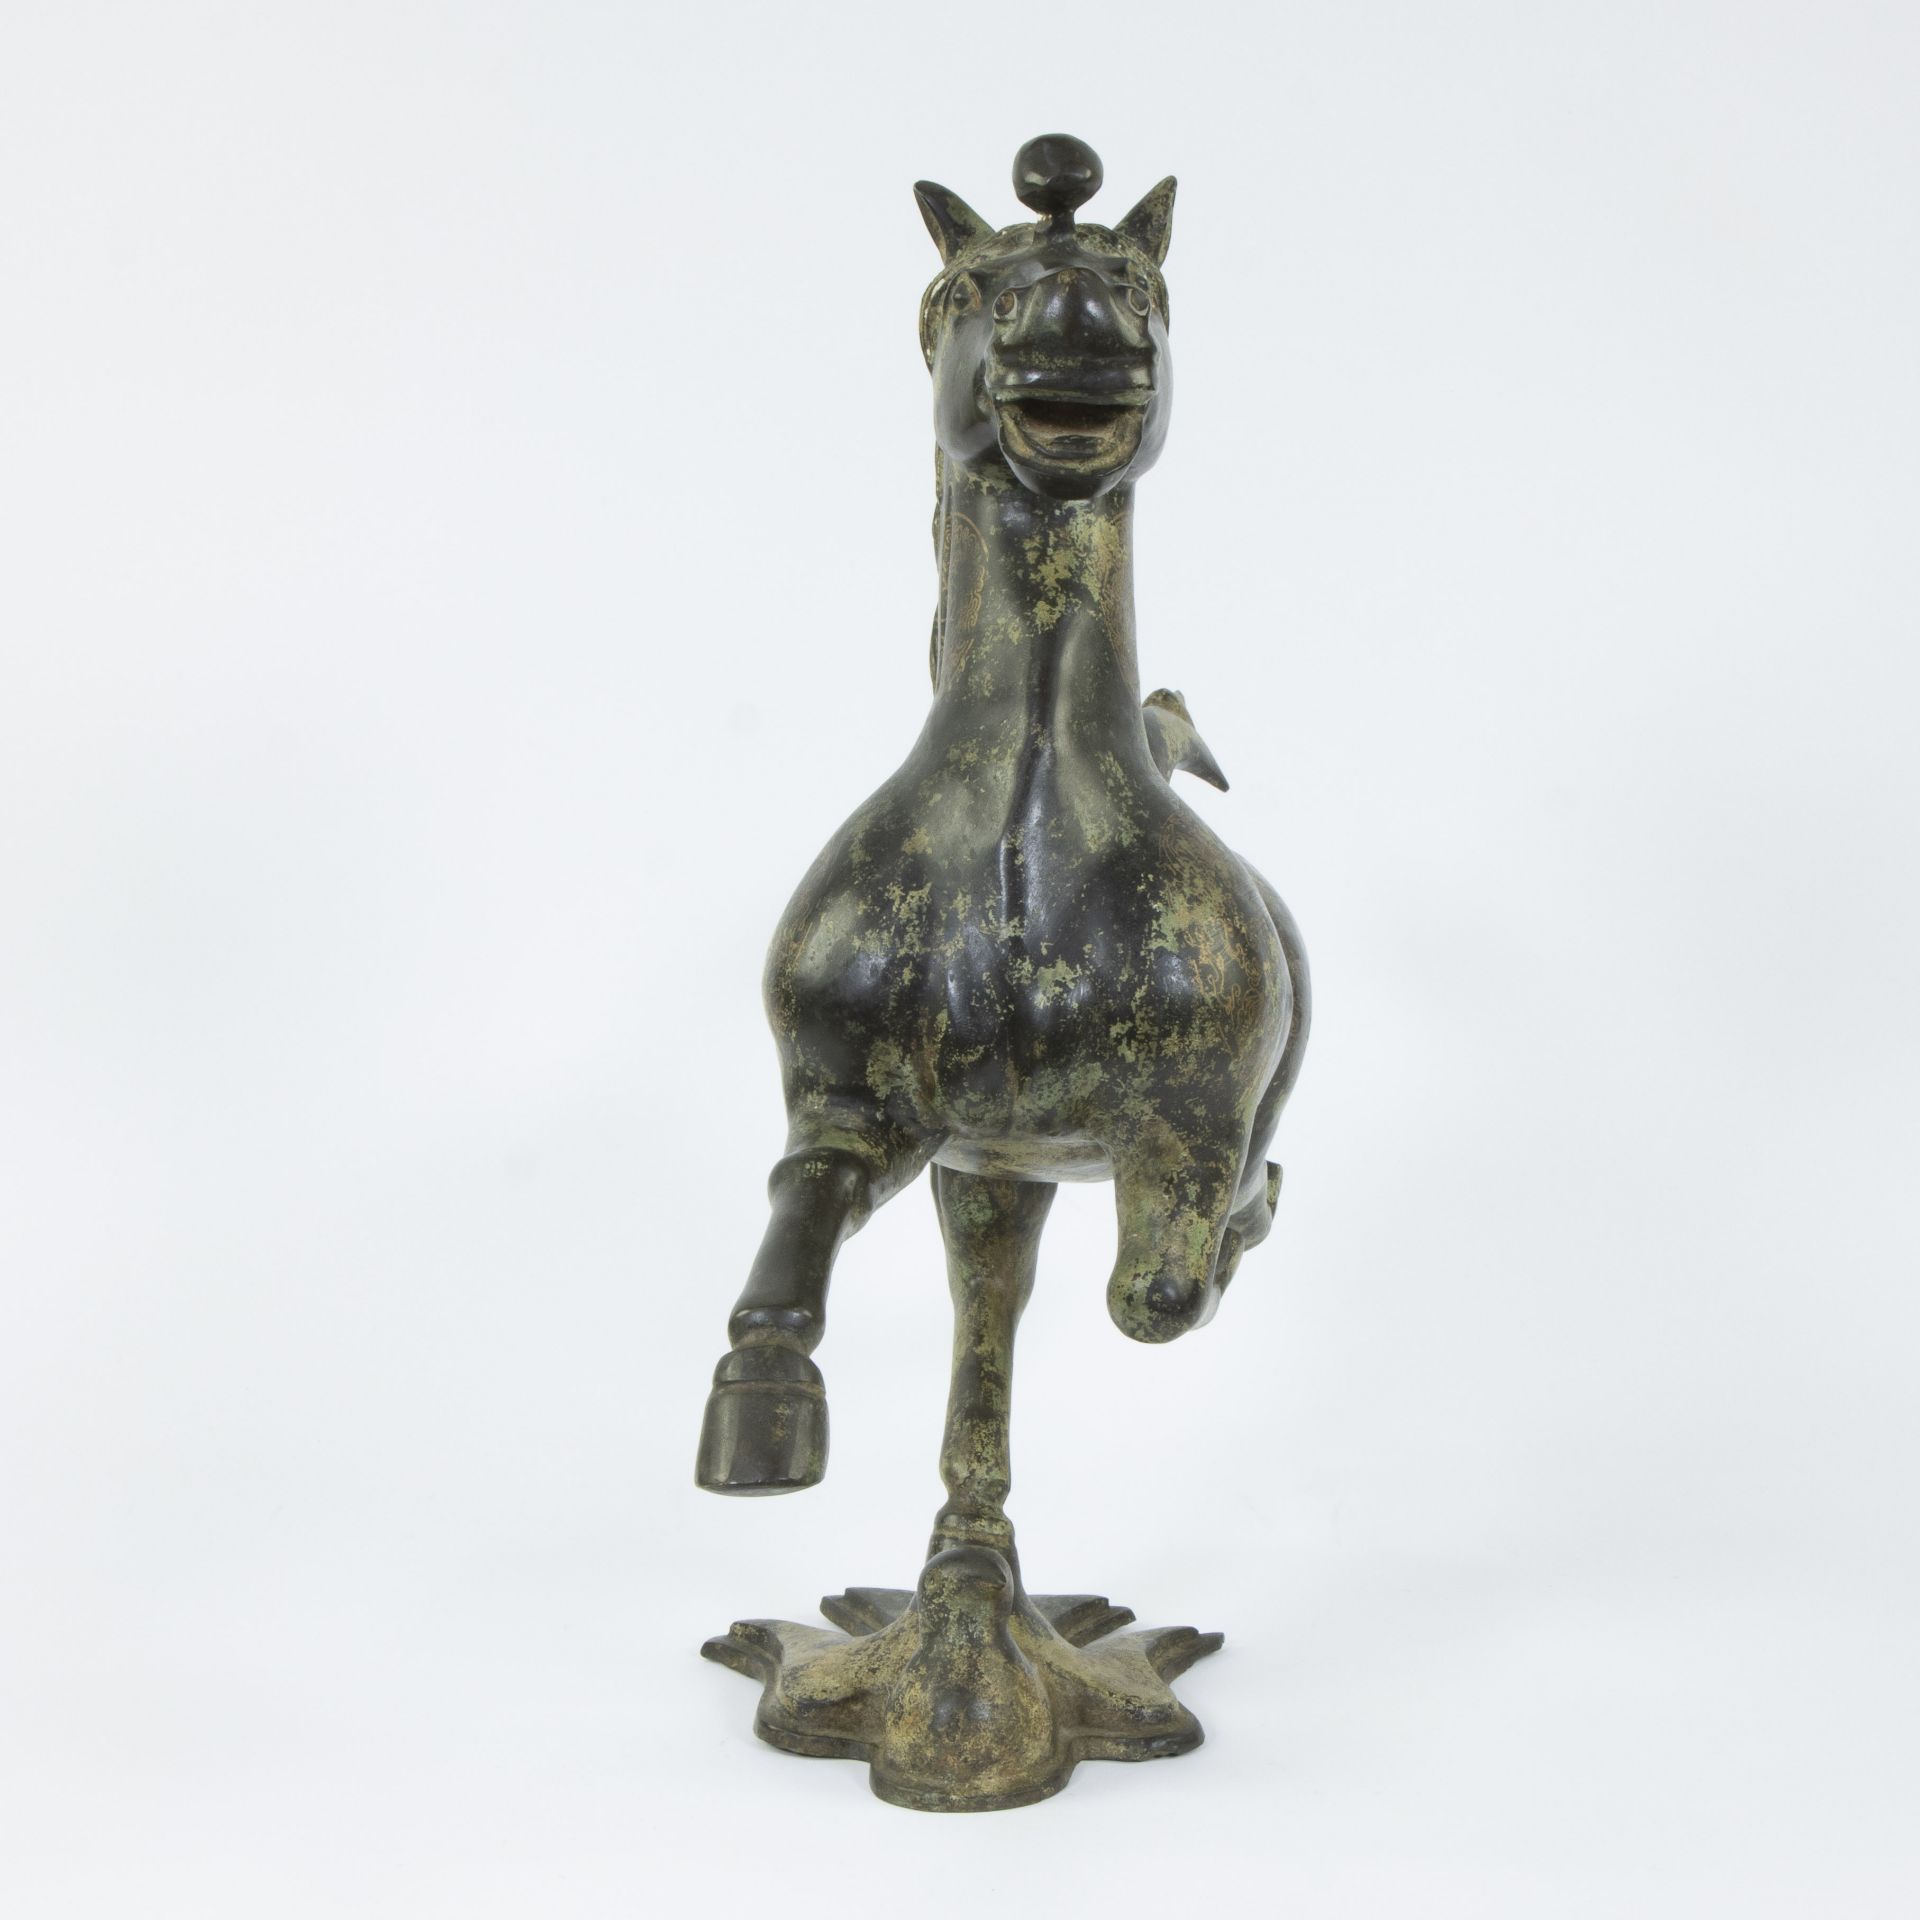 Chinese bronze sculpture representing the Gansu flying horse known as the Flying Horse of the Han Dy - Image 5 of 6